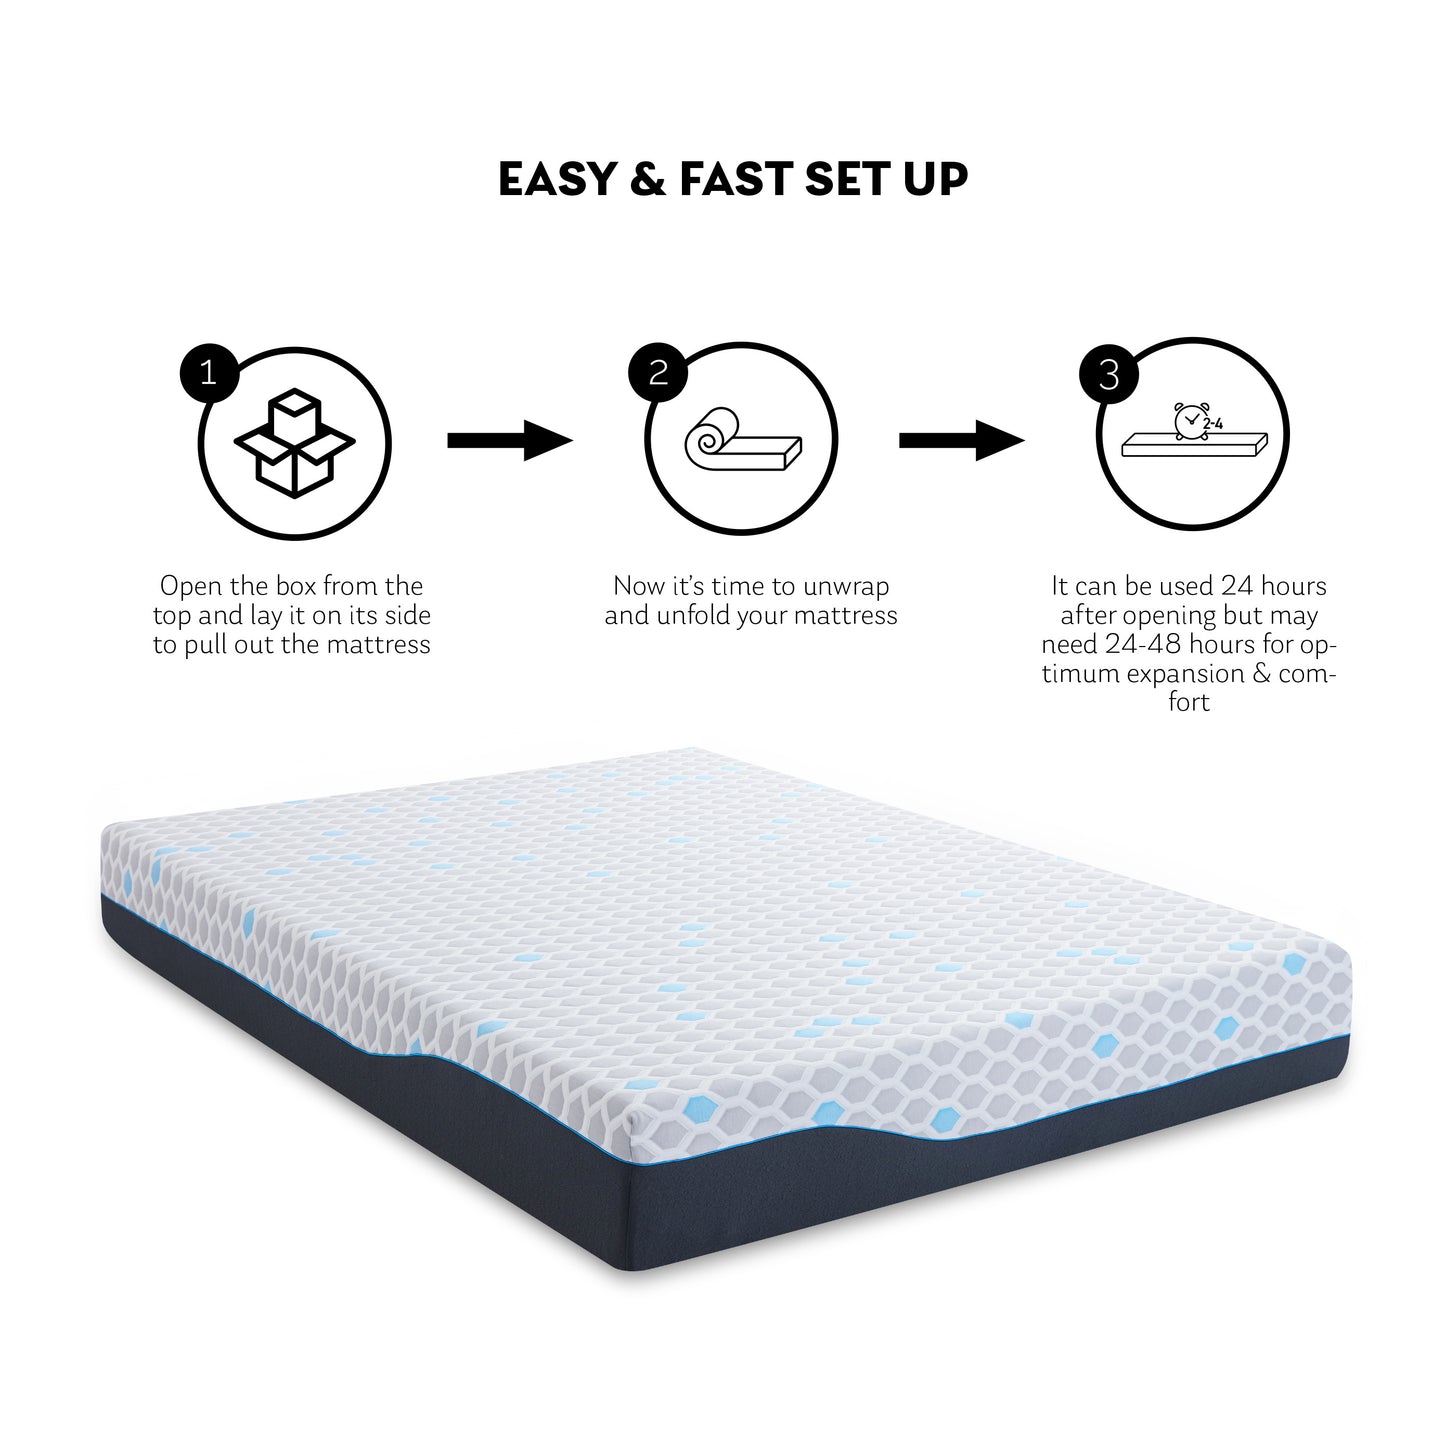 10 Inch Twin Size Memory Foam Mattress, Mattress in A Box, Gel Memory Foam Infused Bamboo Charcoal, CertiPUR-US Certified,Made in USA